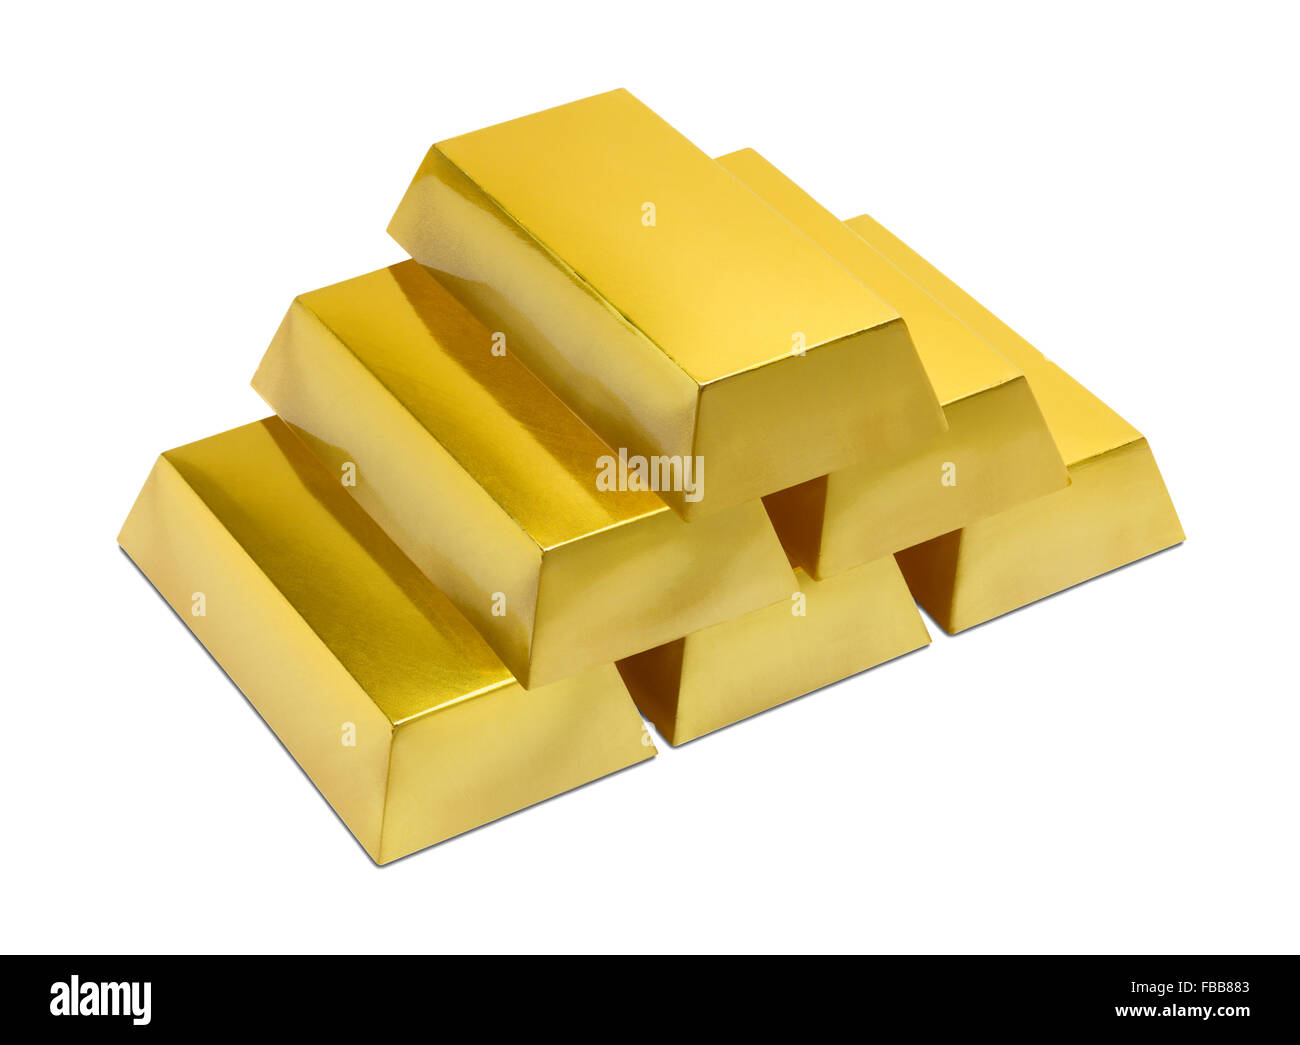 Pile of Gold Bars on a White Background. Stock Photo